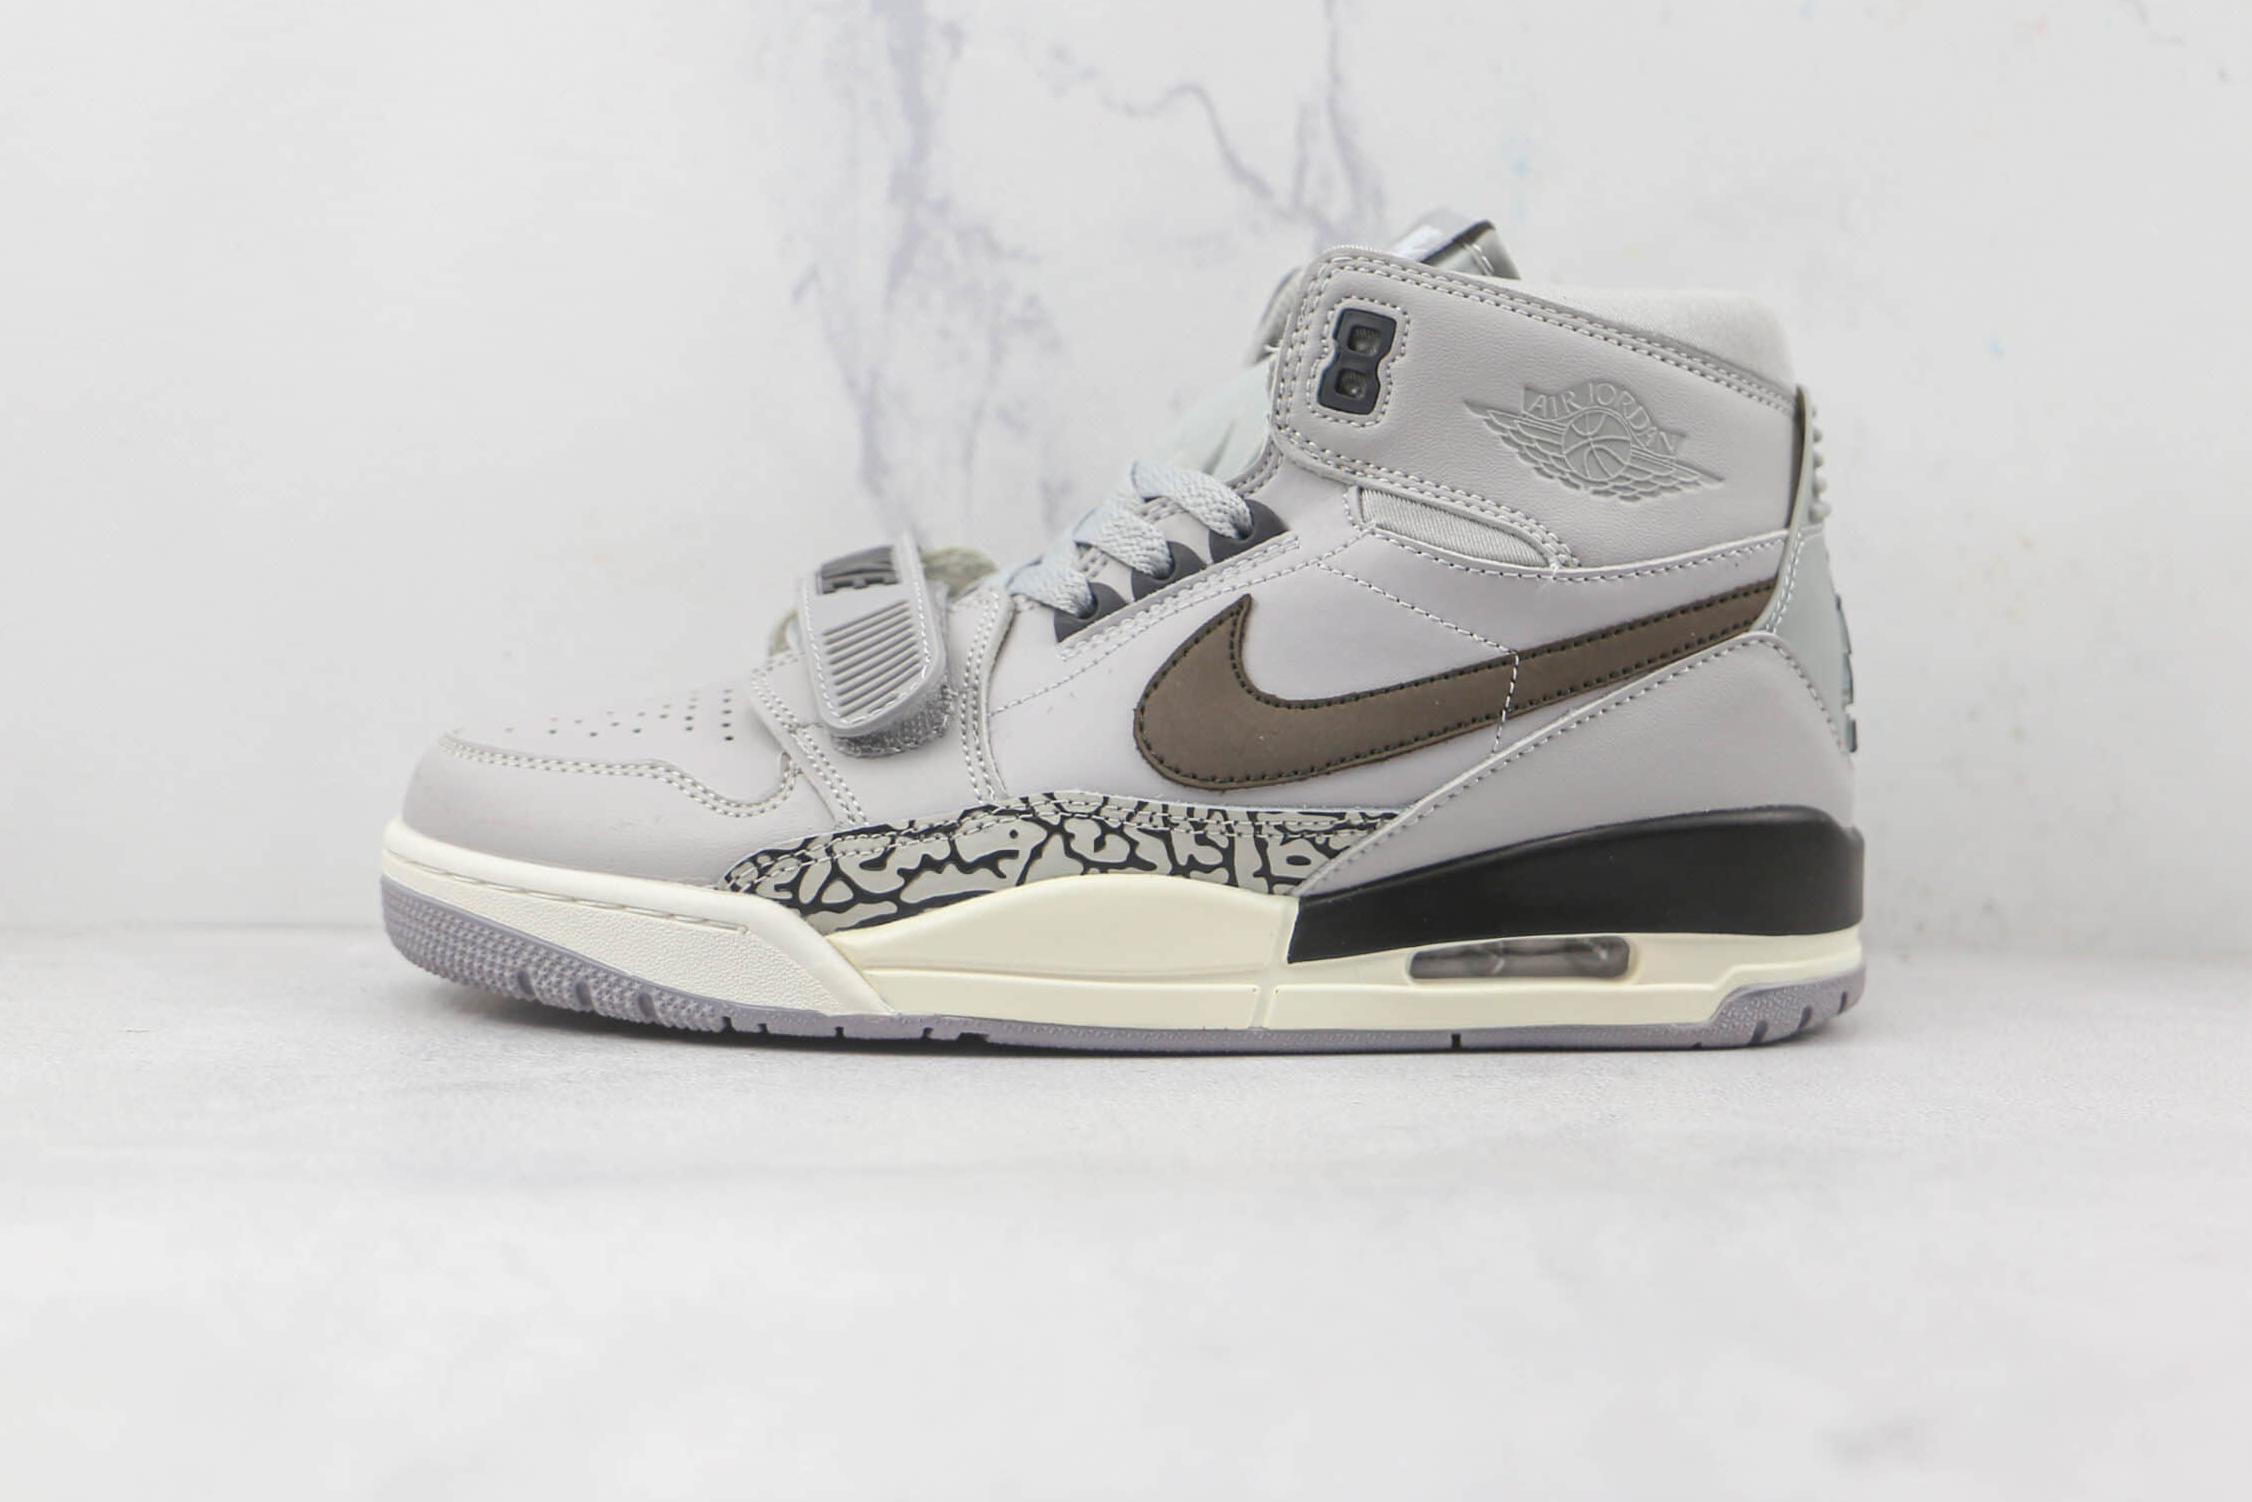 Nike Jordan Legacy 312 'Wolf Grey' AT4040-002: Iconic Design Meets Contemporary Style